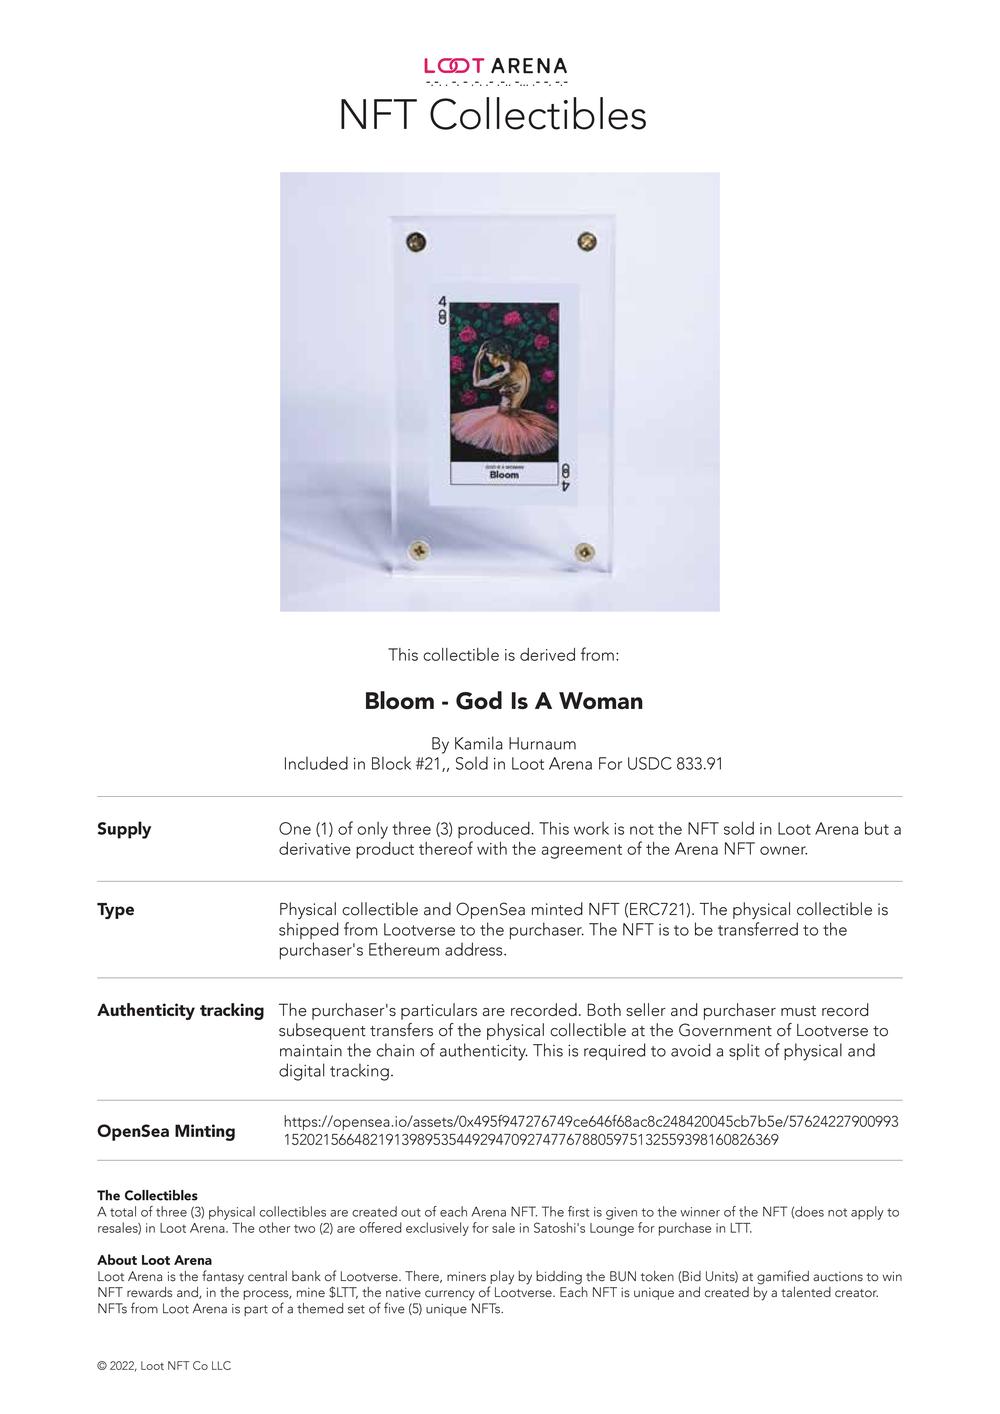 Bloom_#1 Collectible_Contract.pdf